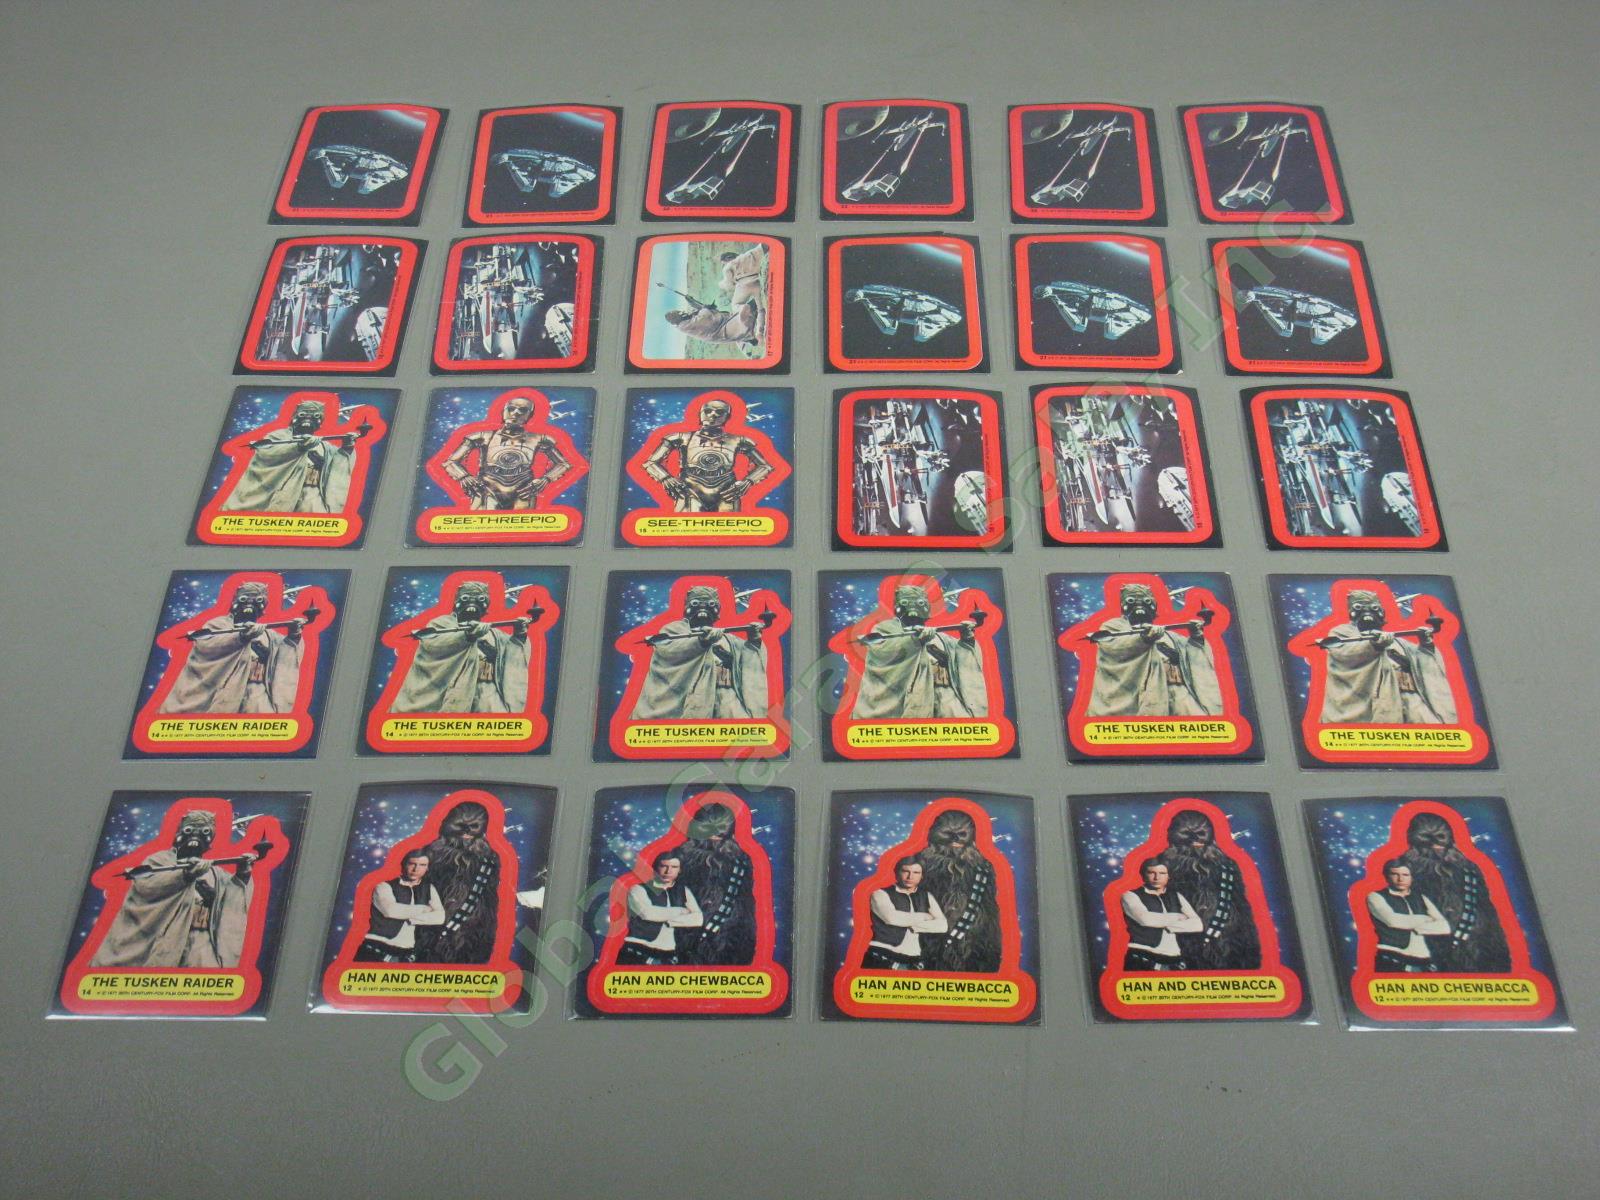 121 Topps Star Wars Sticker Cards Lot 1977 Series 1 2 3 4 5 Empire Strikes Back 2